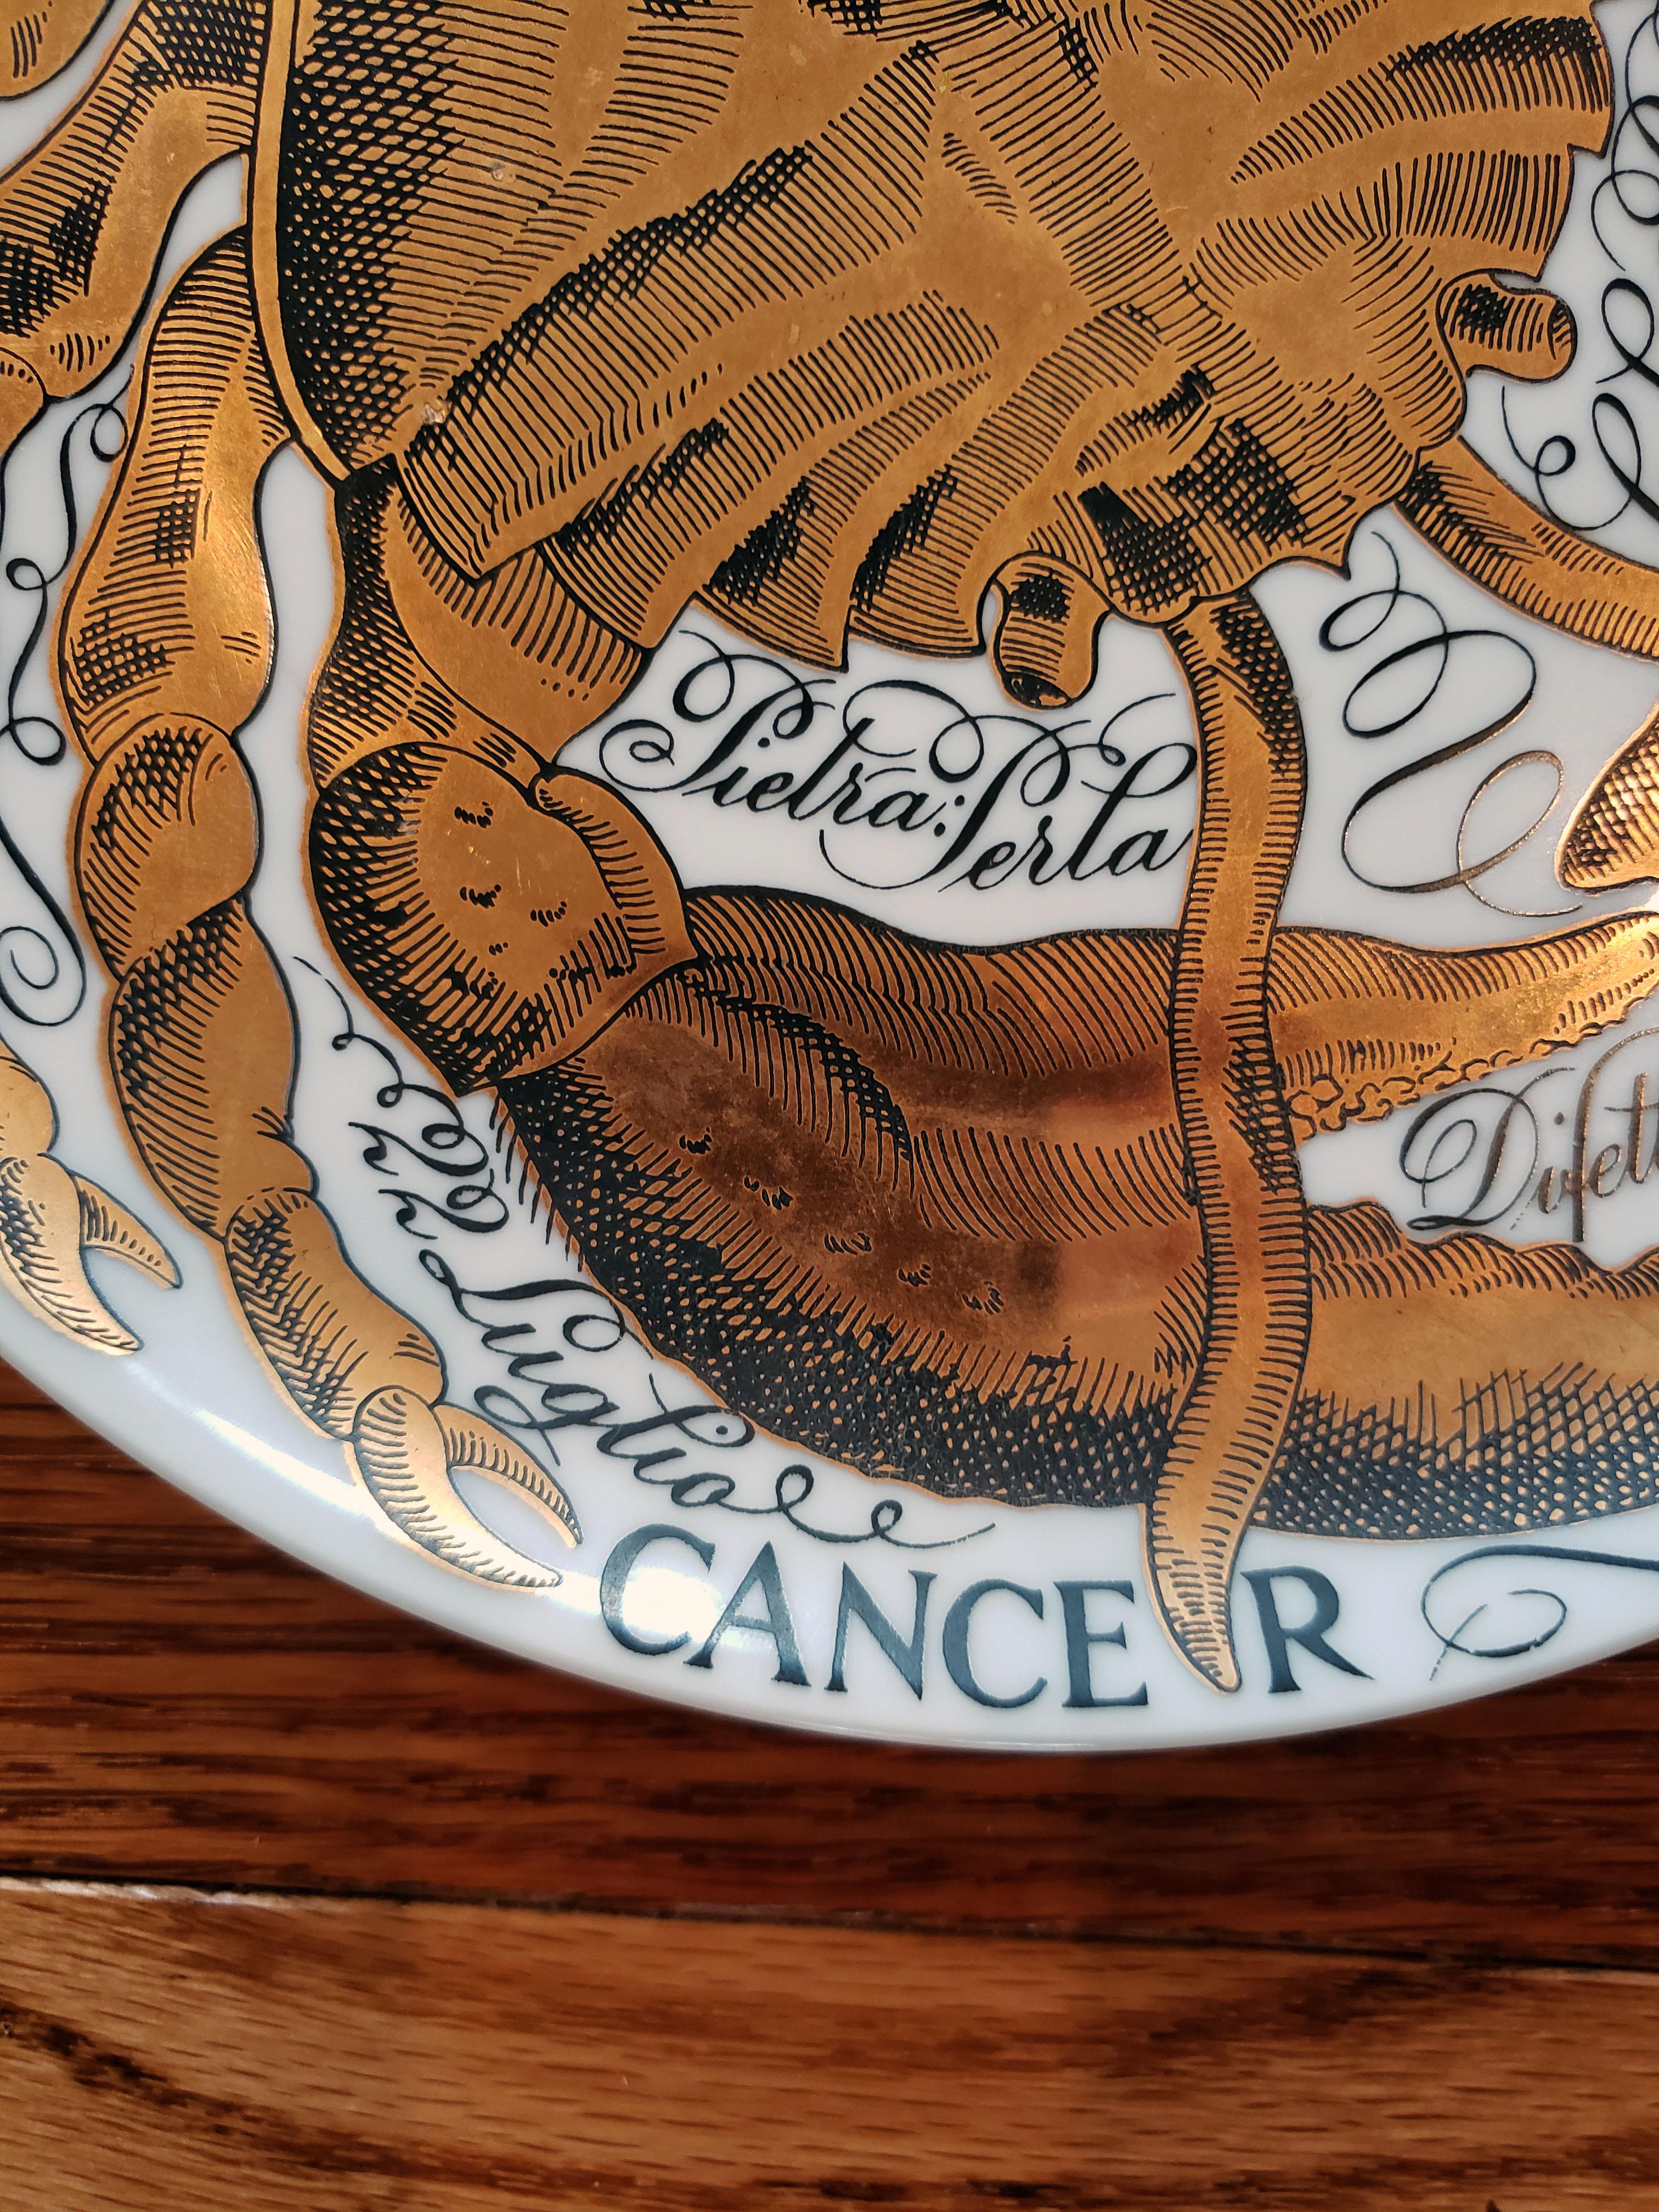 Vintage Piero Fornasetti Porcelain zodiac plate,
Cancer,
Astrali Pattern,
Made for Corisia,
Dated 1974, No 11.

The plate for the sign CANCER is dated 1974 and is numbered #11. The plate depicts the Astrological Zodiac sign Cancer which is